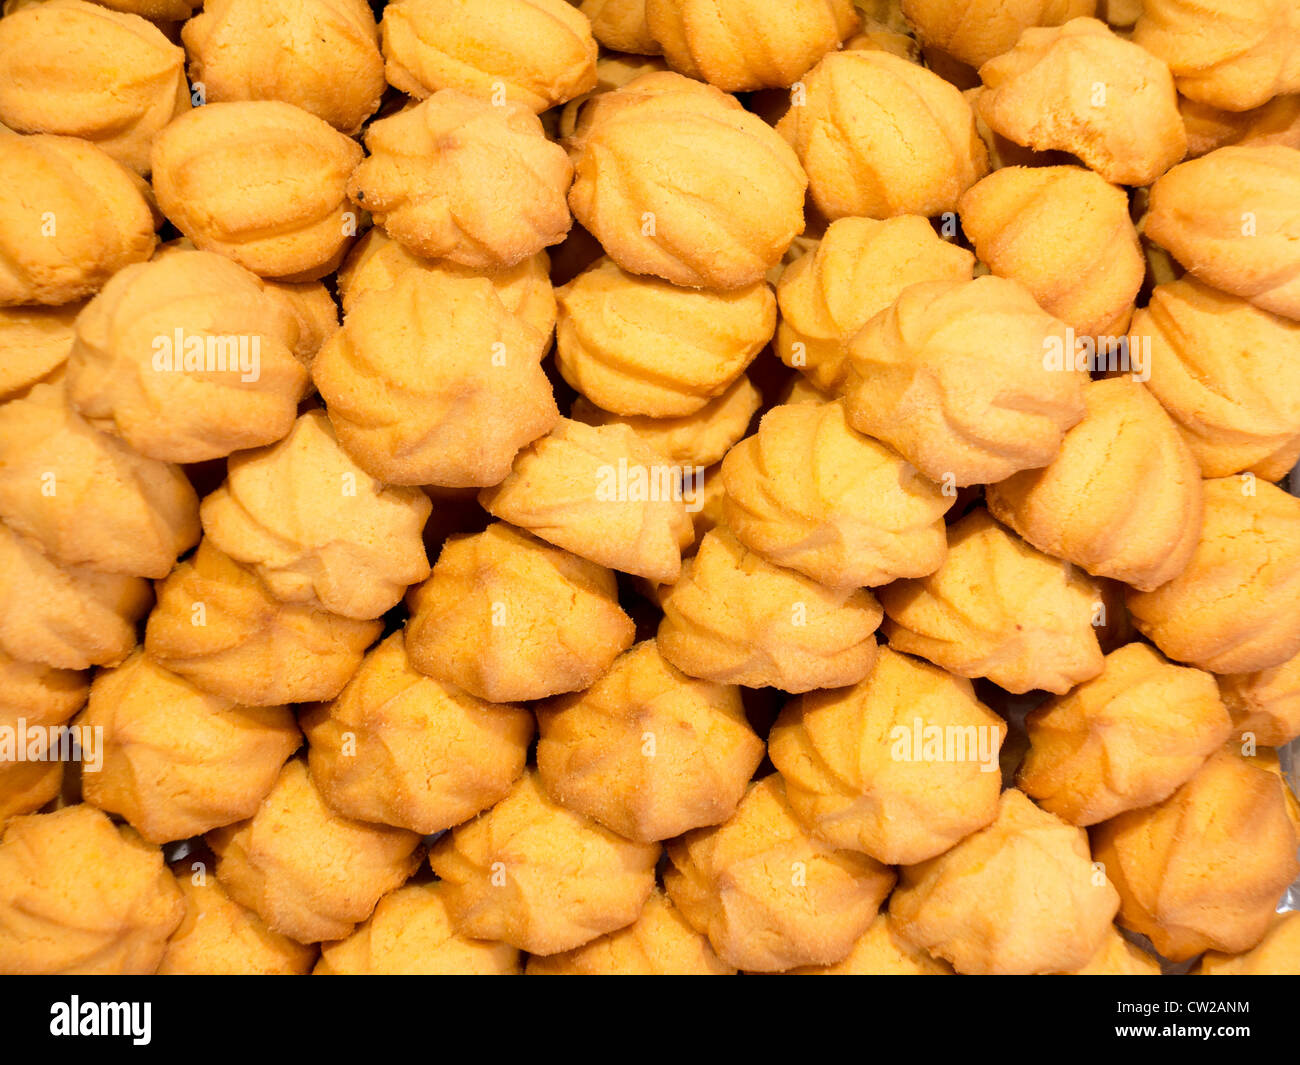 A large pile of delicious fresh-baked cookies Stock Photo